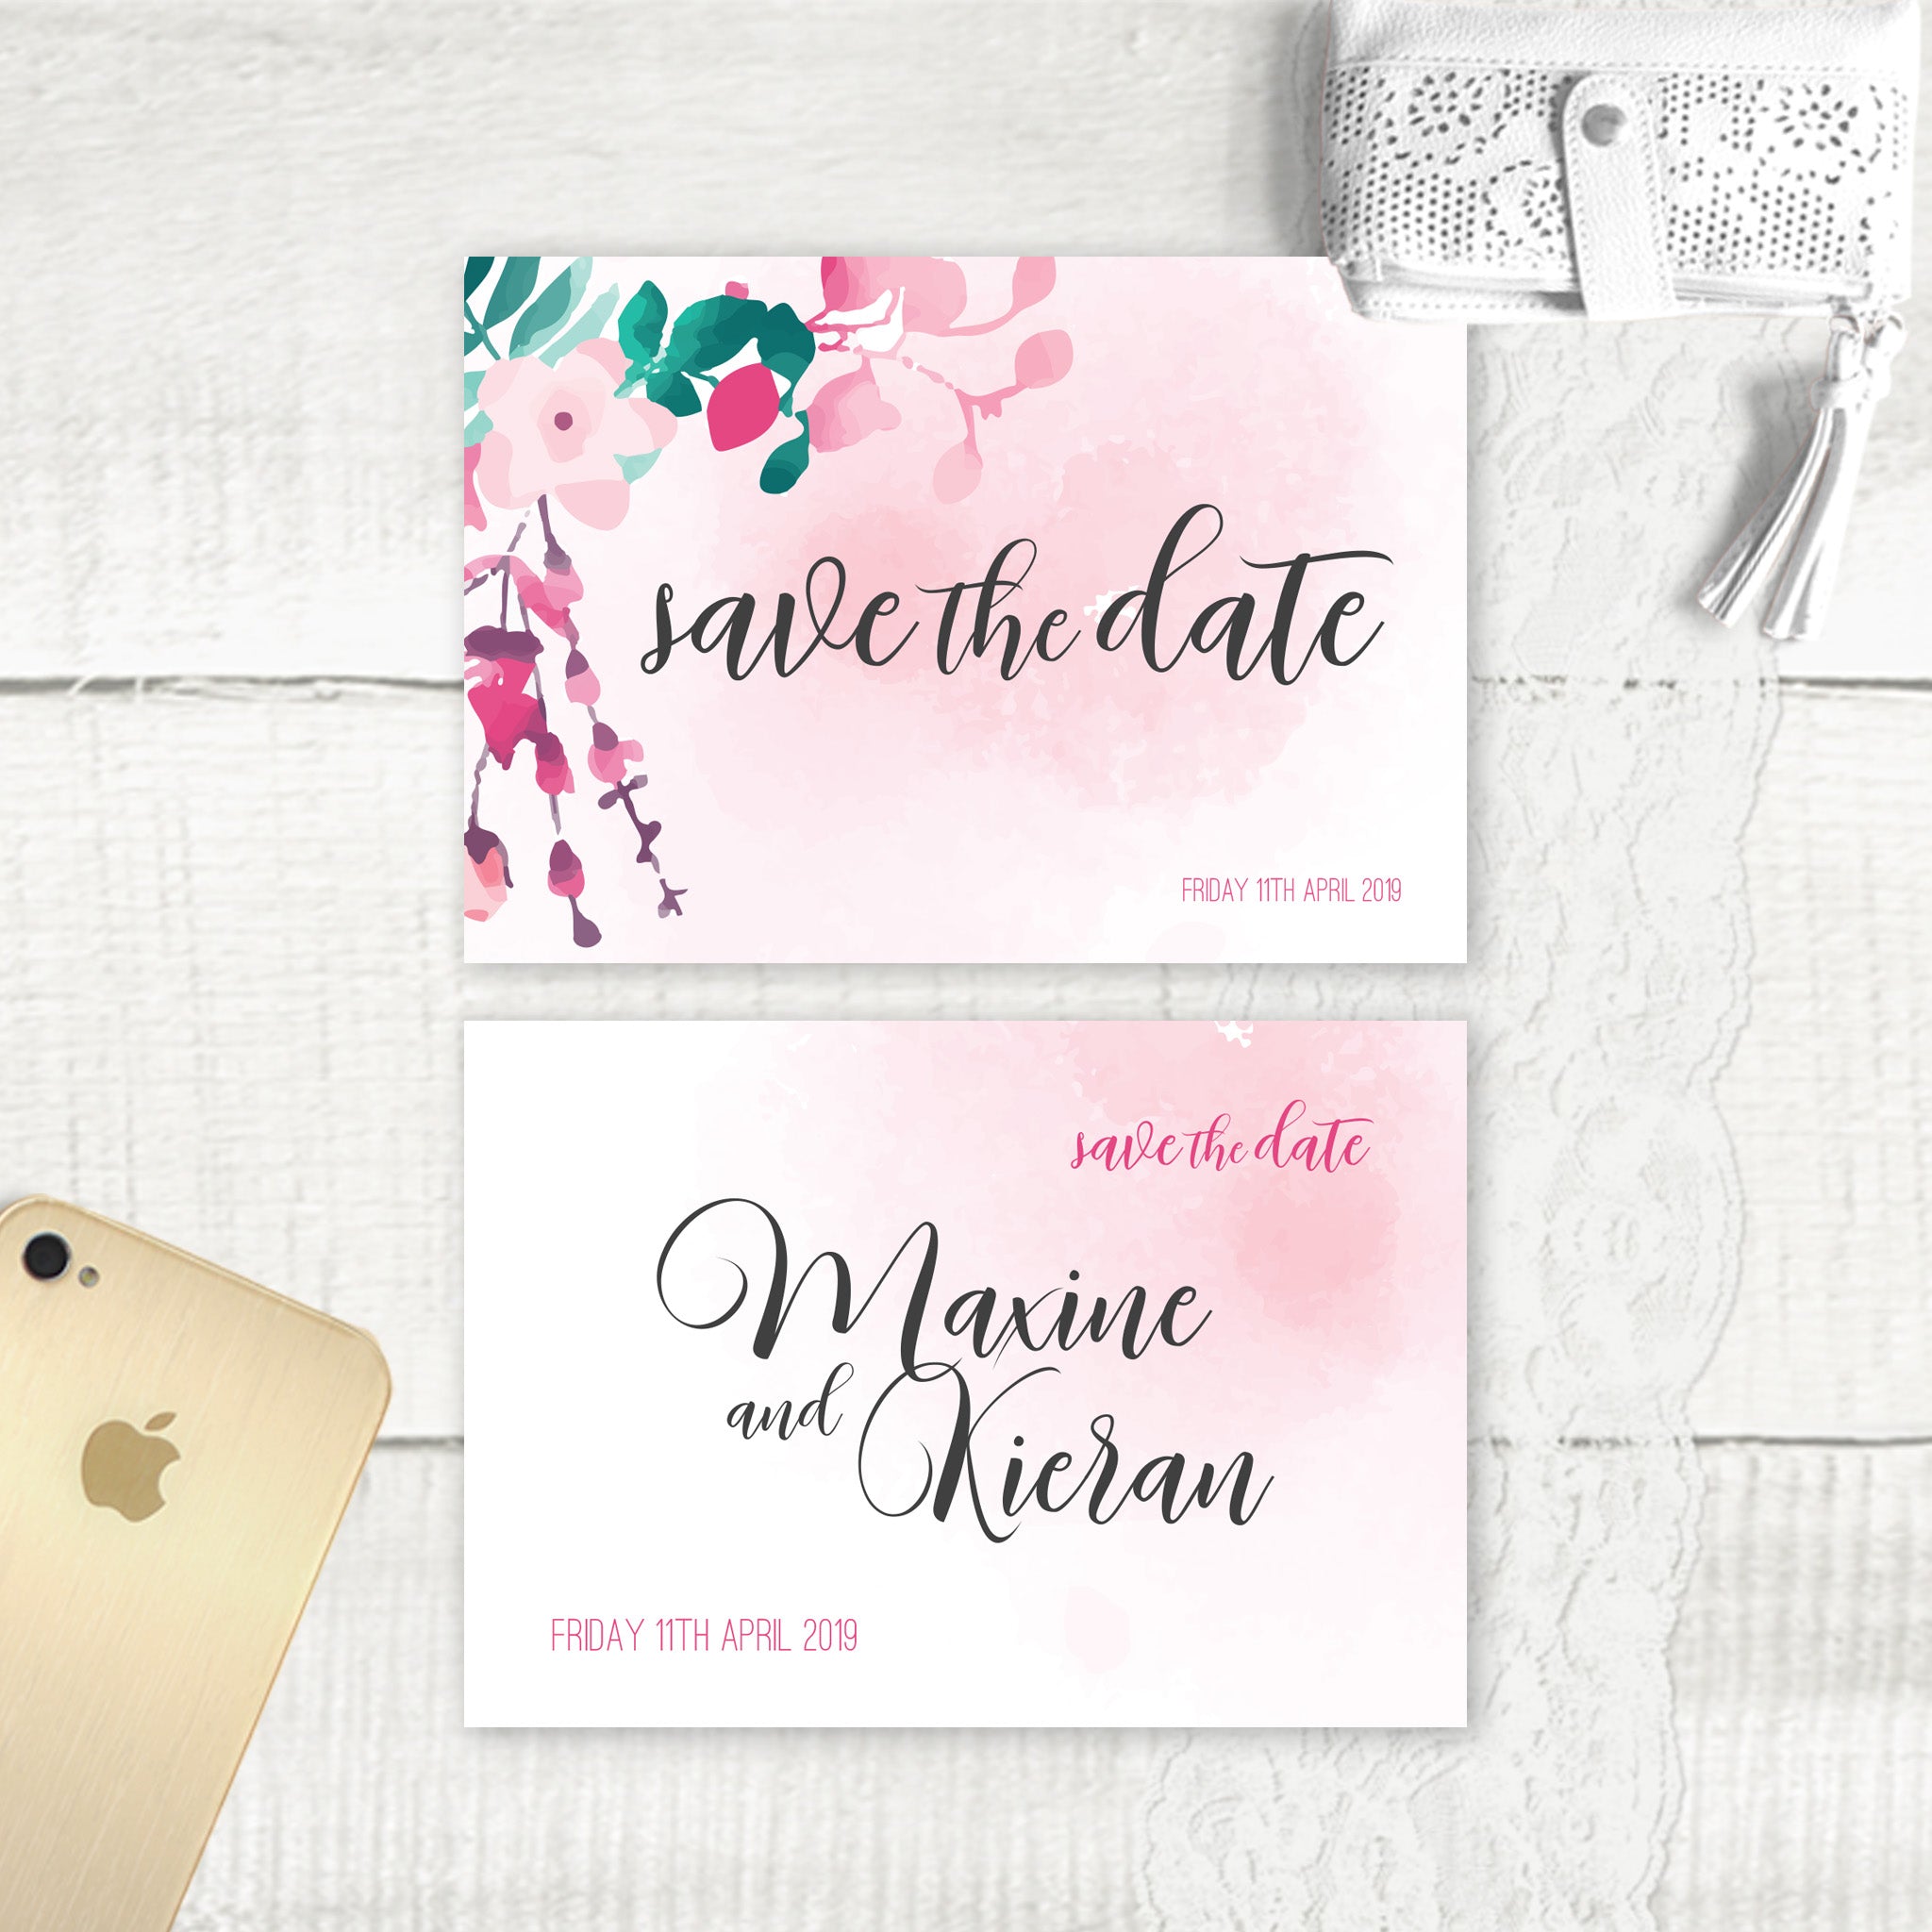 Cherry Blossom 2 - Save the Date